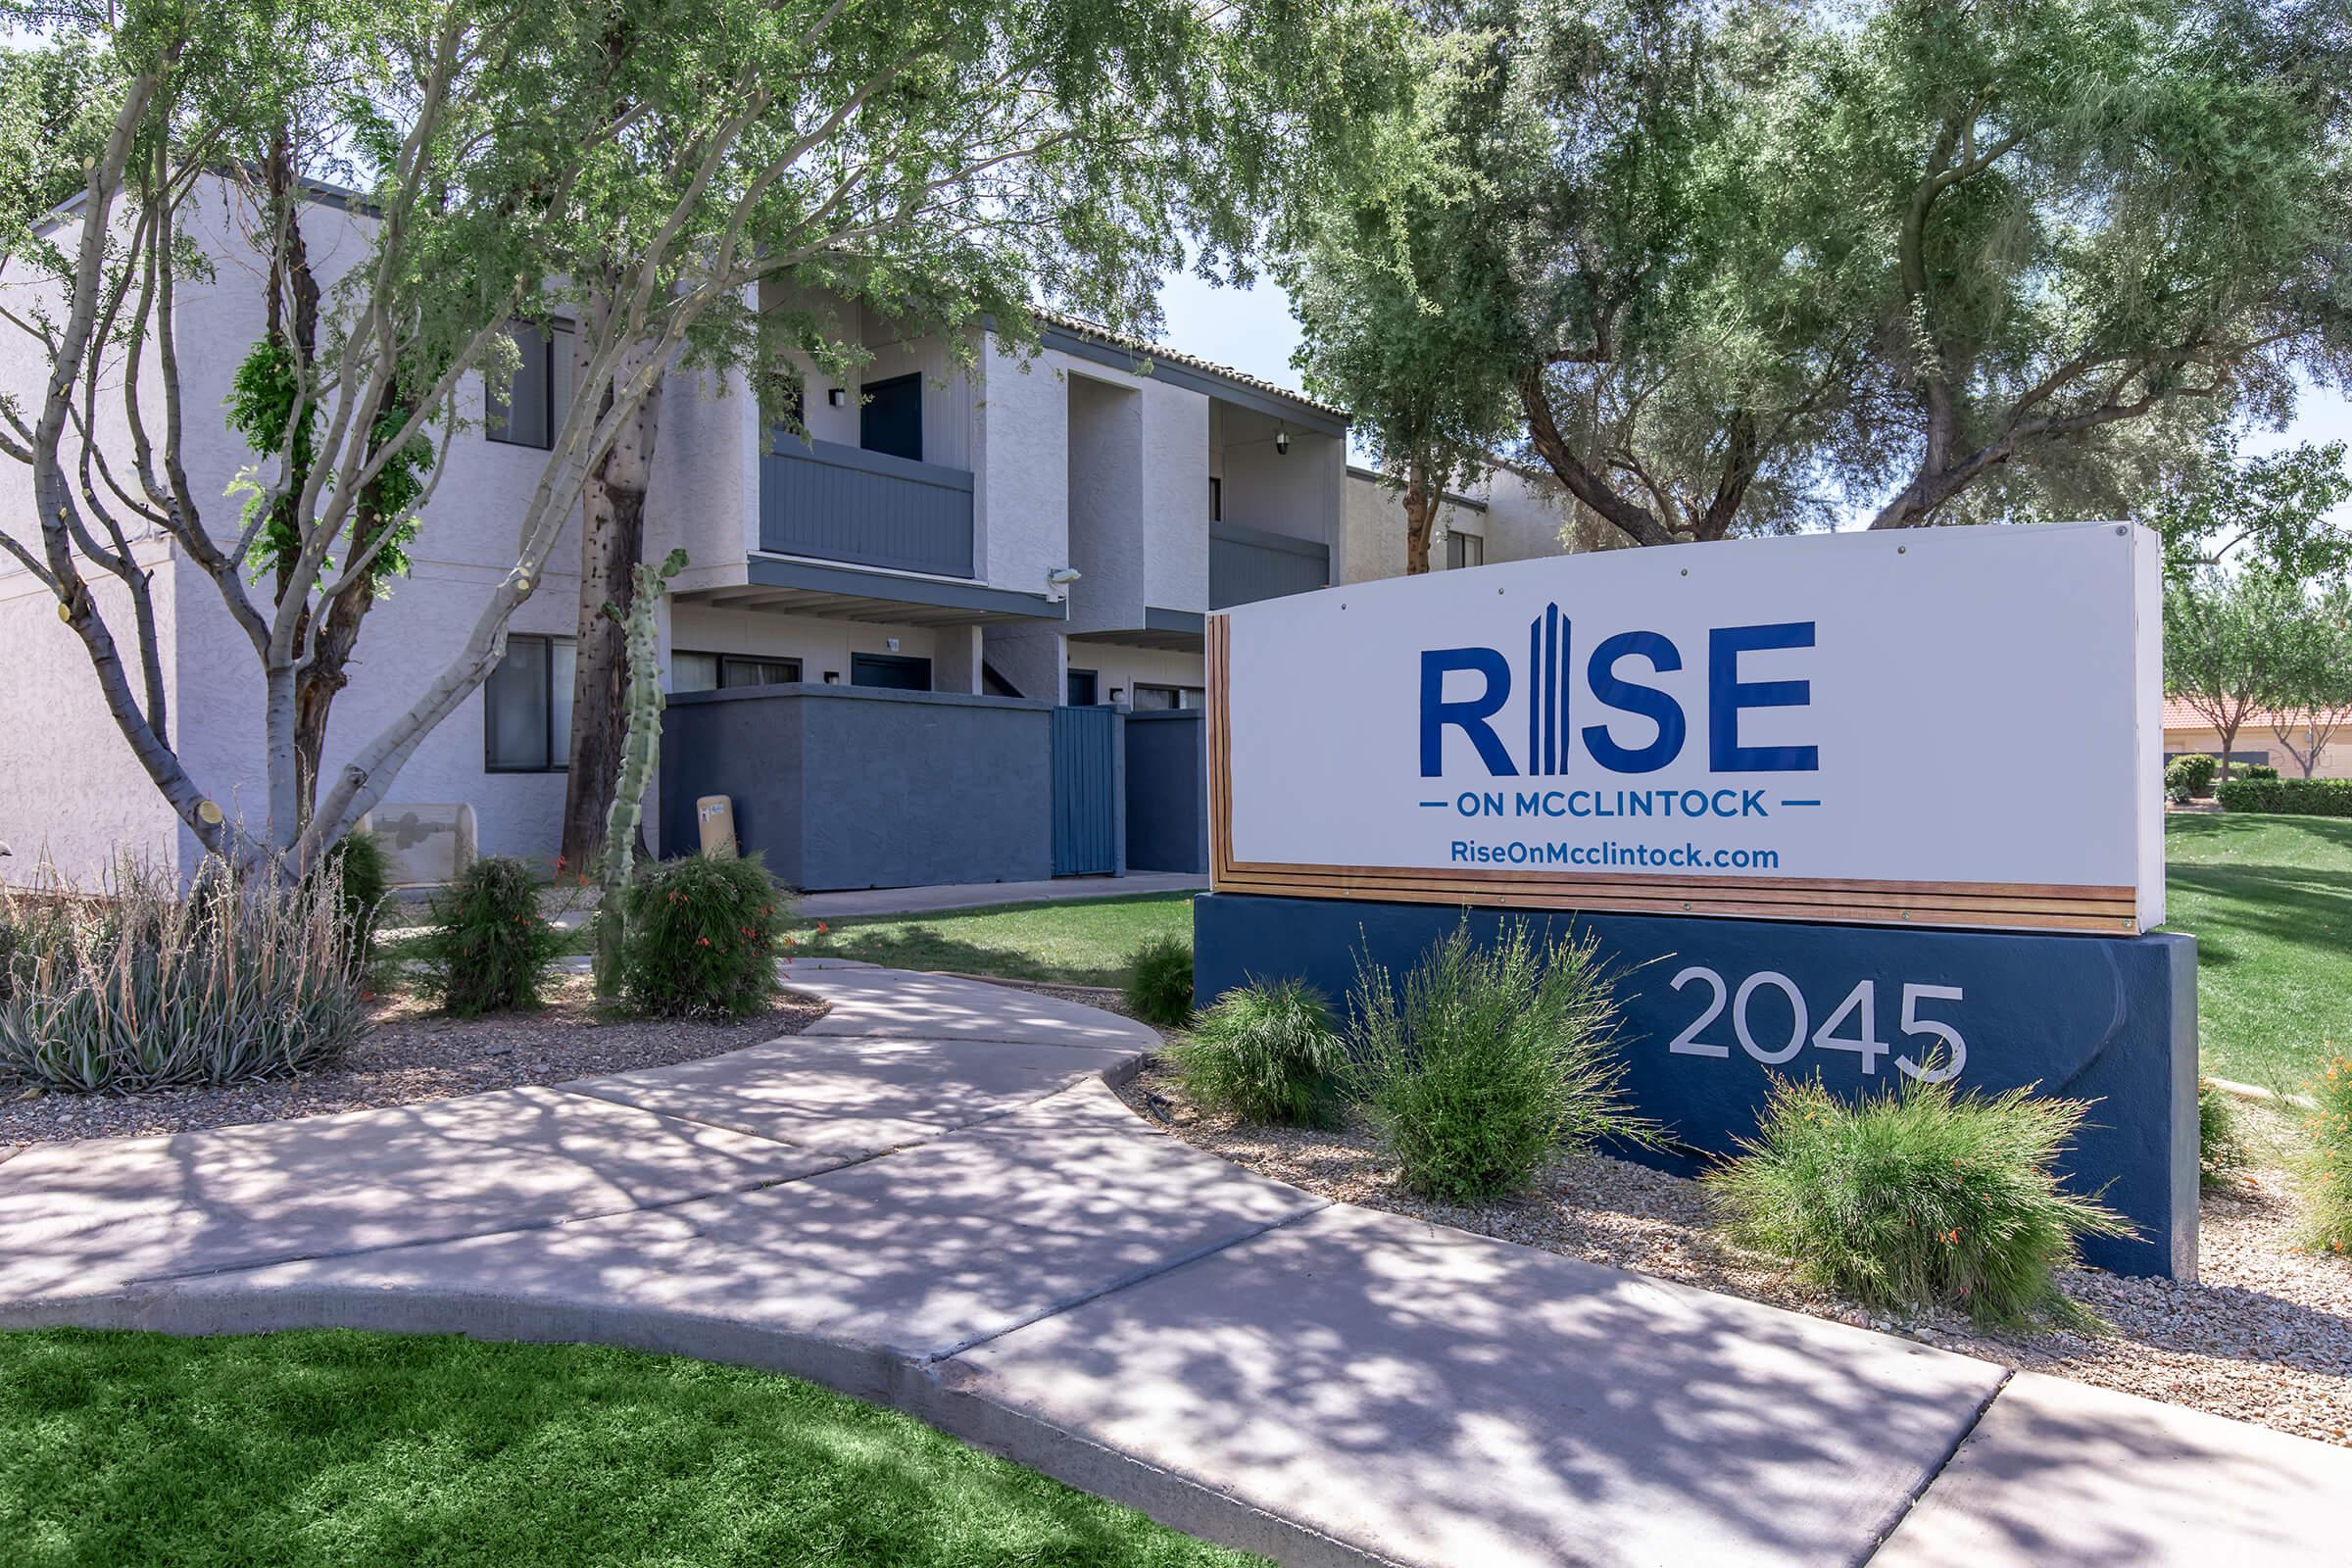 The entrance signage at Rise on McClintock in Tempe, AZ.